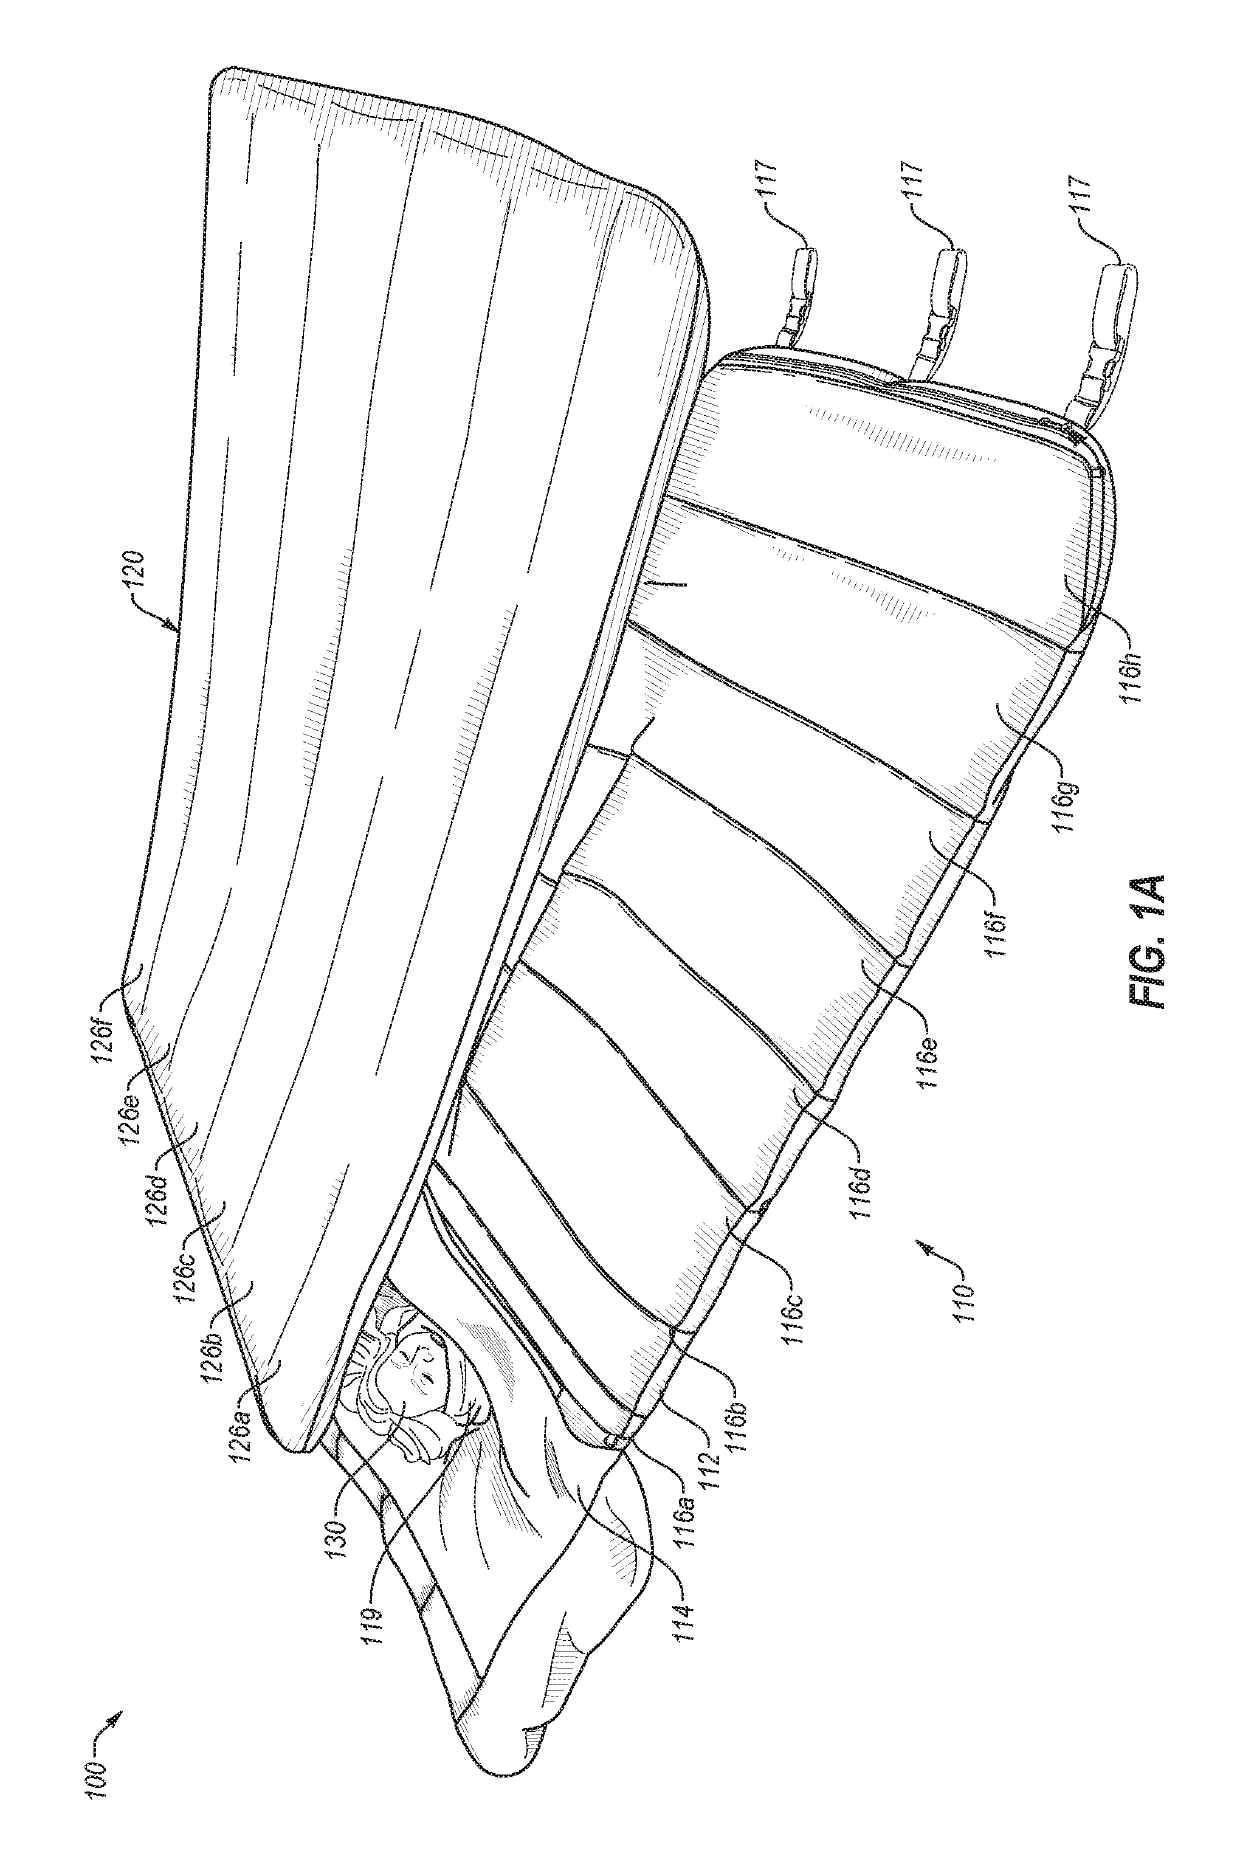 Sleeping bag with integrated quilt